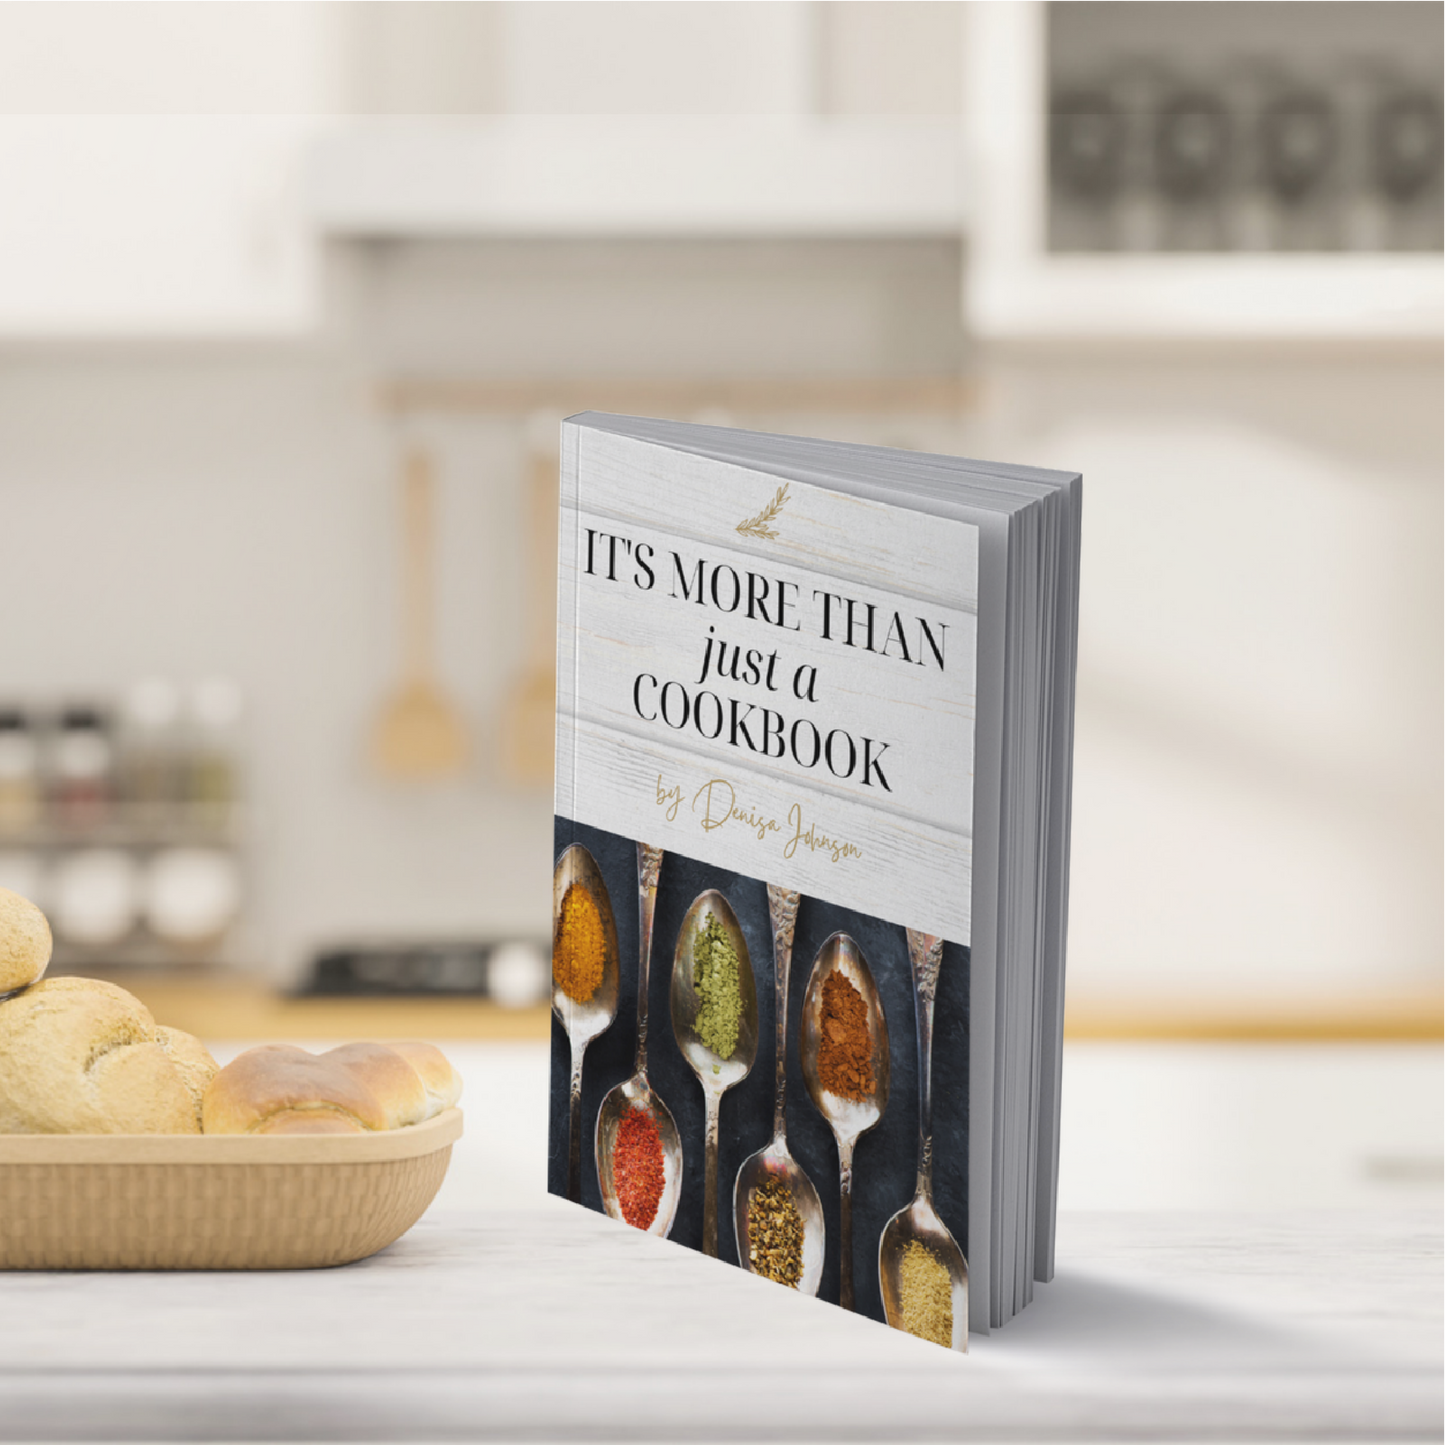 It's More Than just a Cookbook